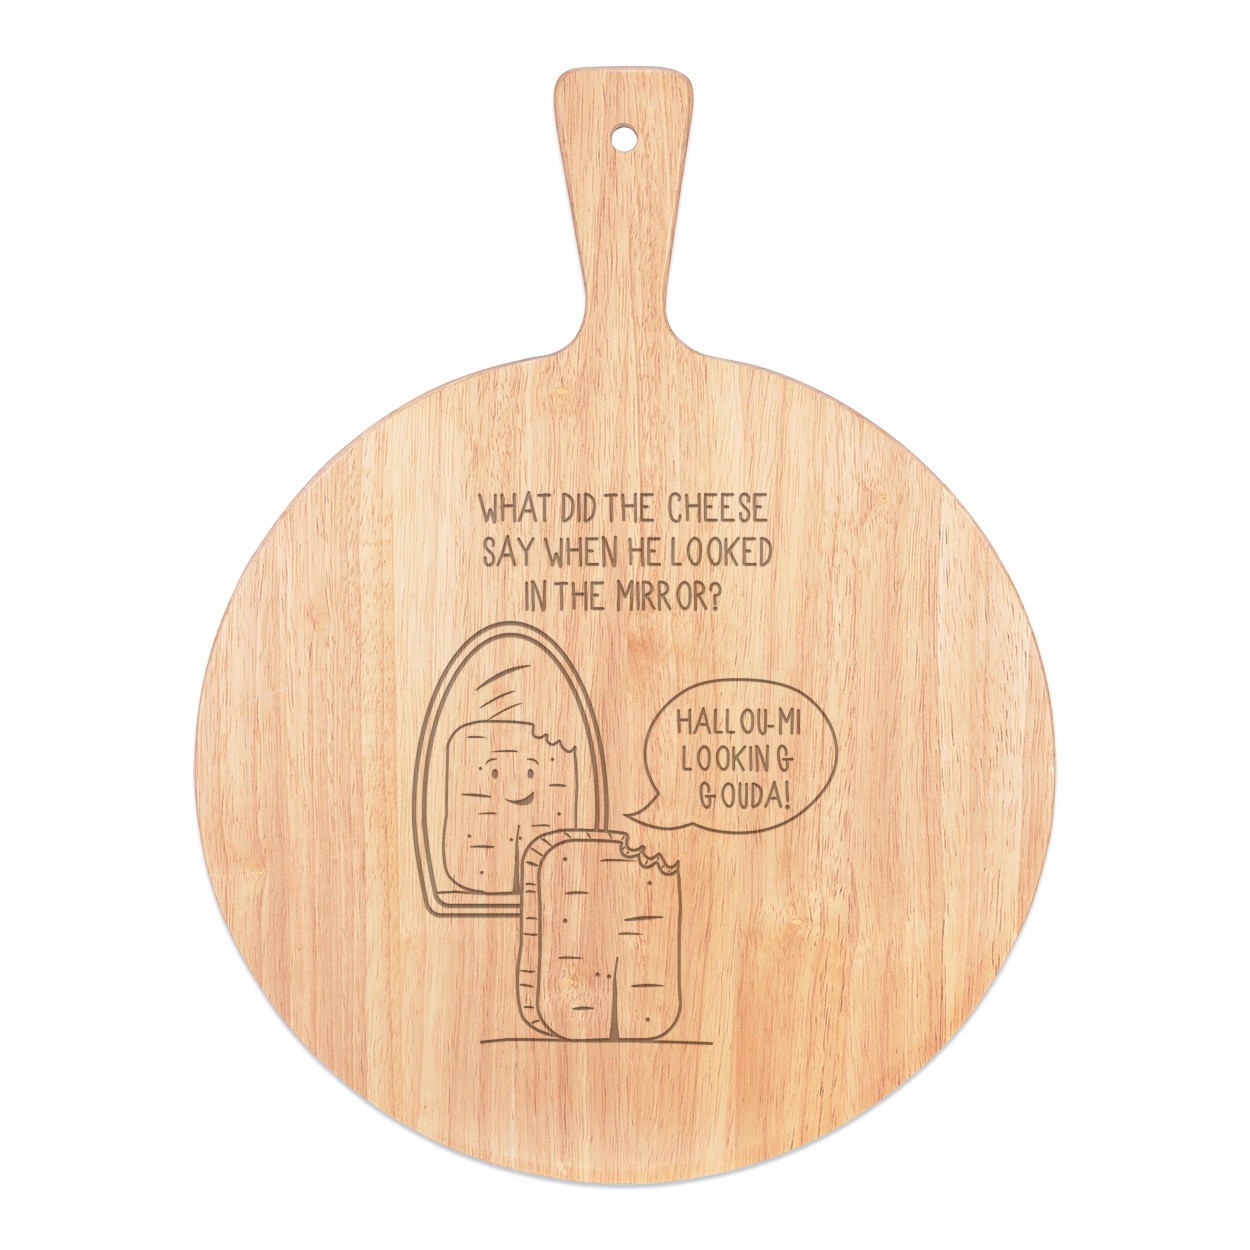 Halloumi Looking Gouda Cheese Joke Pizza Board Paddle Serving Tray Handle Round Wooden 45x34cm